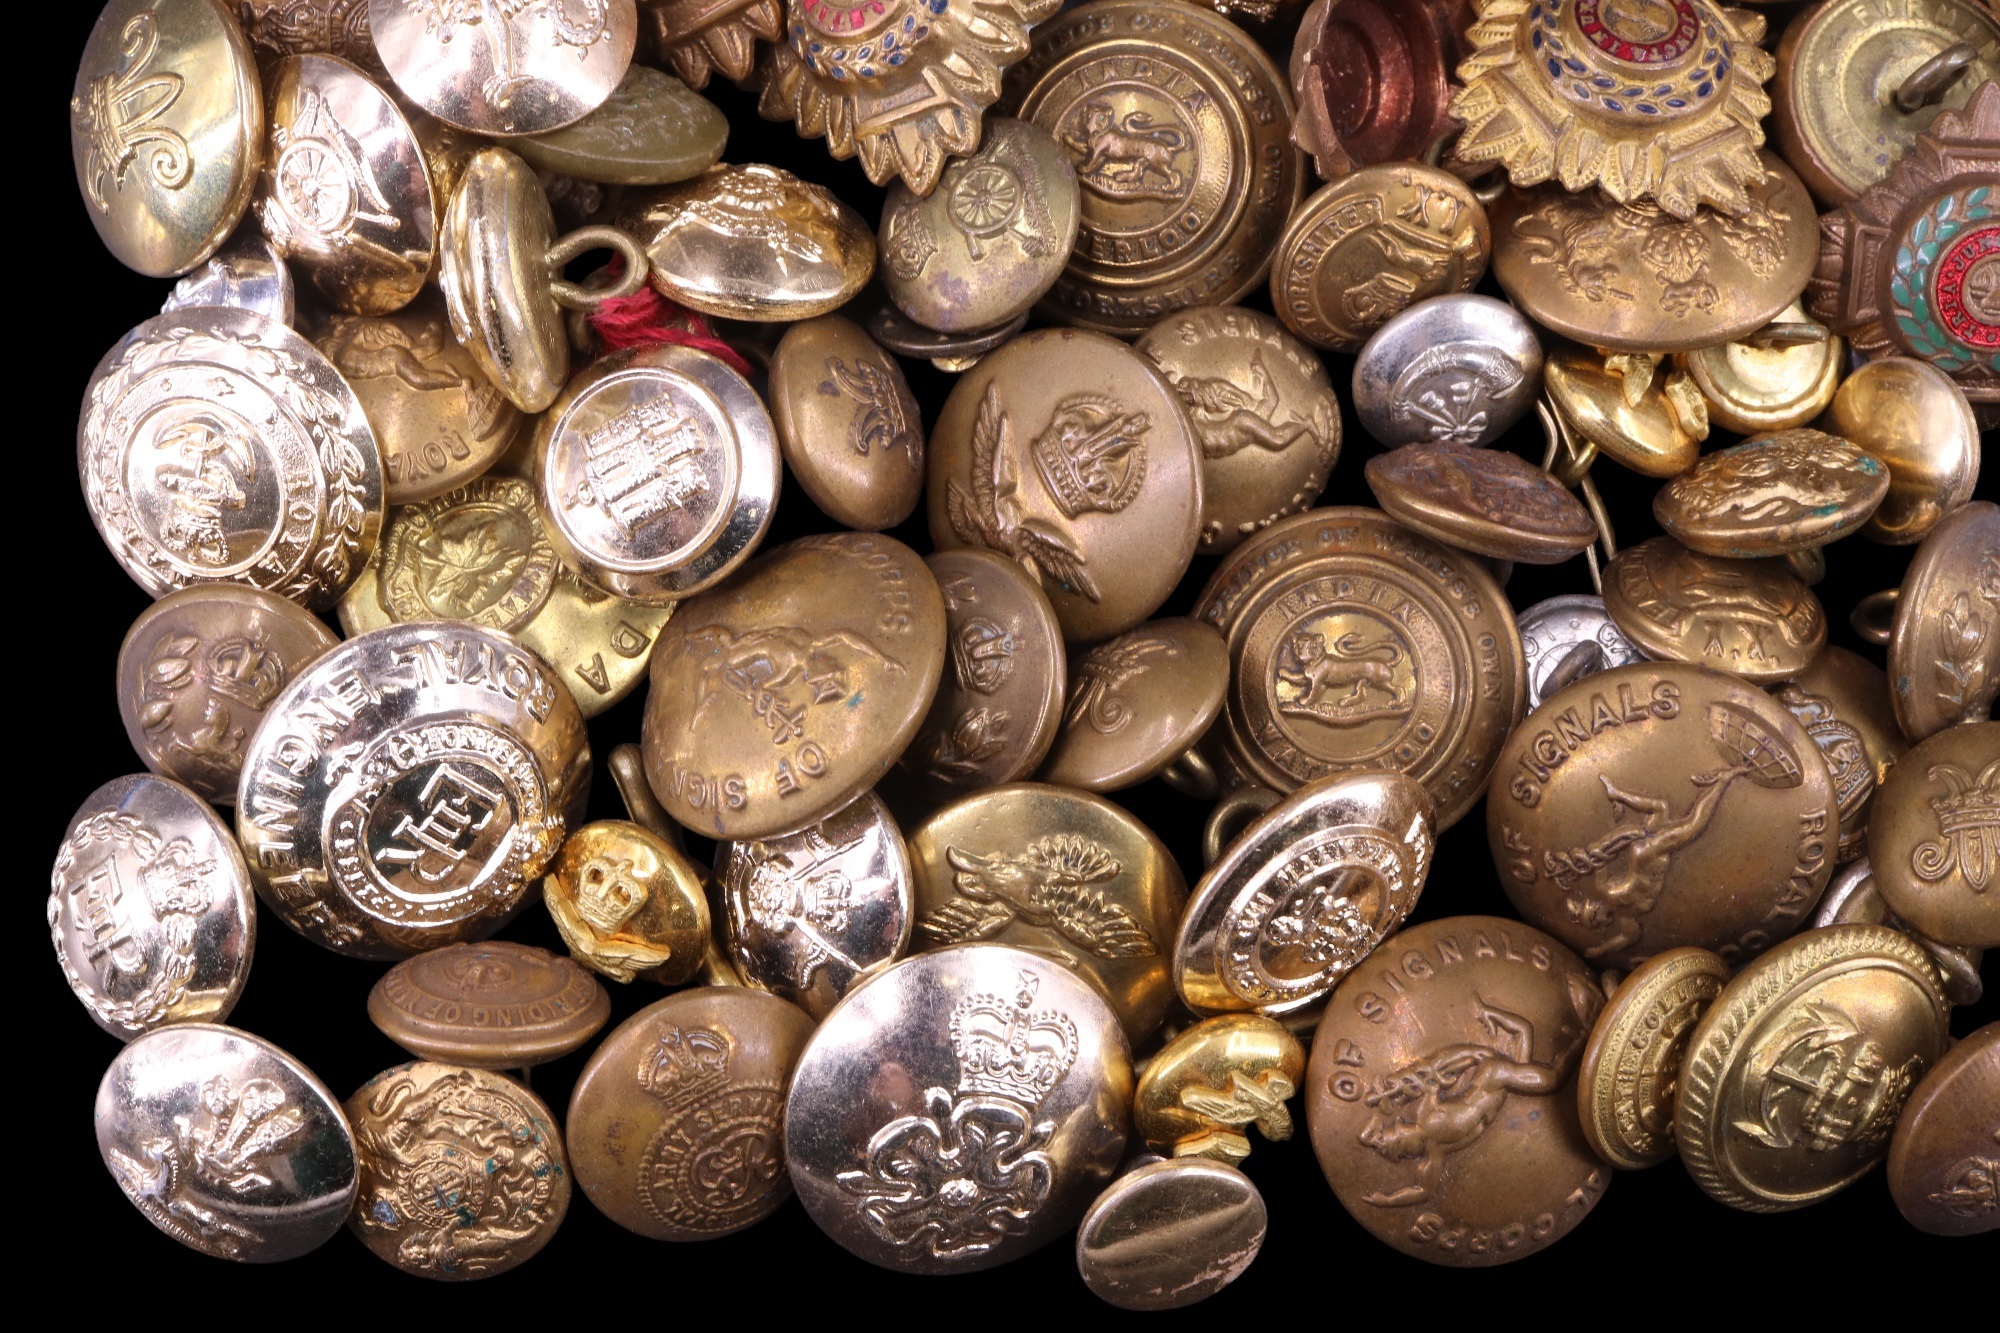 A quantity of British army buttons and rank badges etc - Image 4 of 7